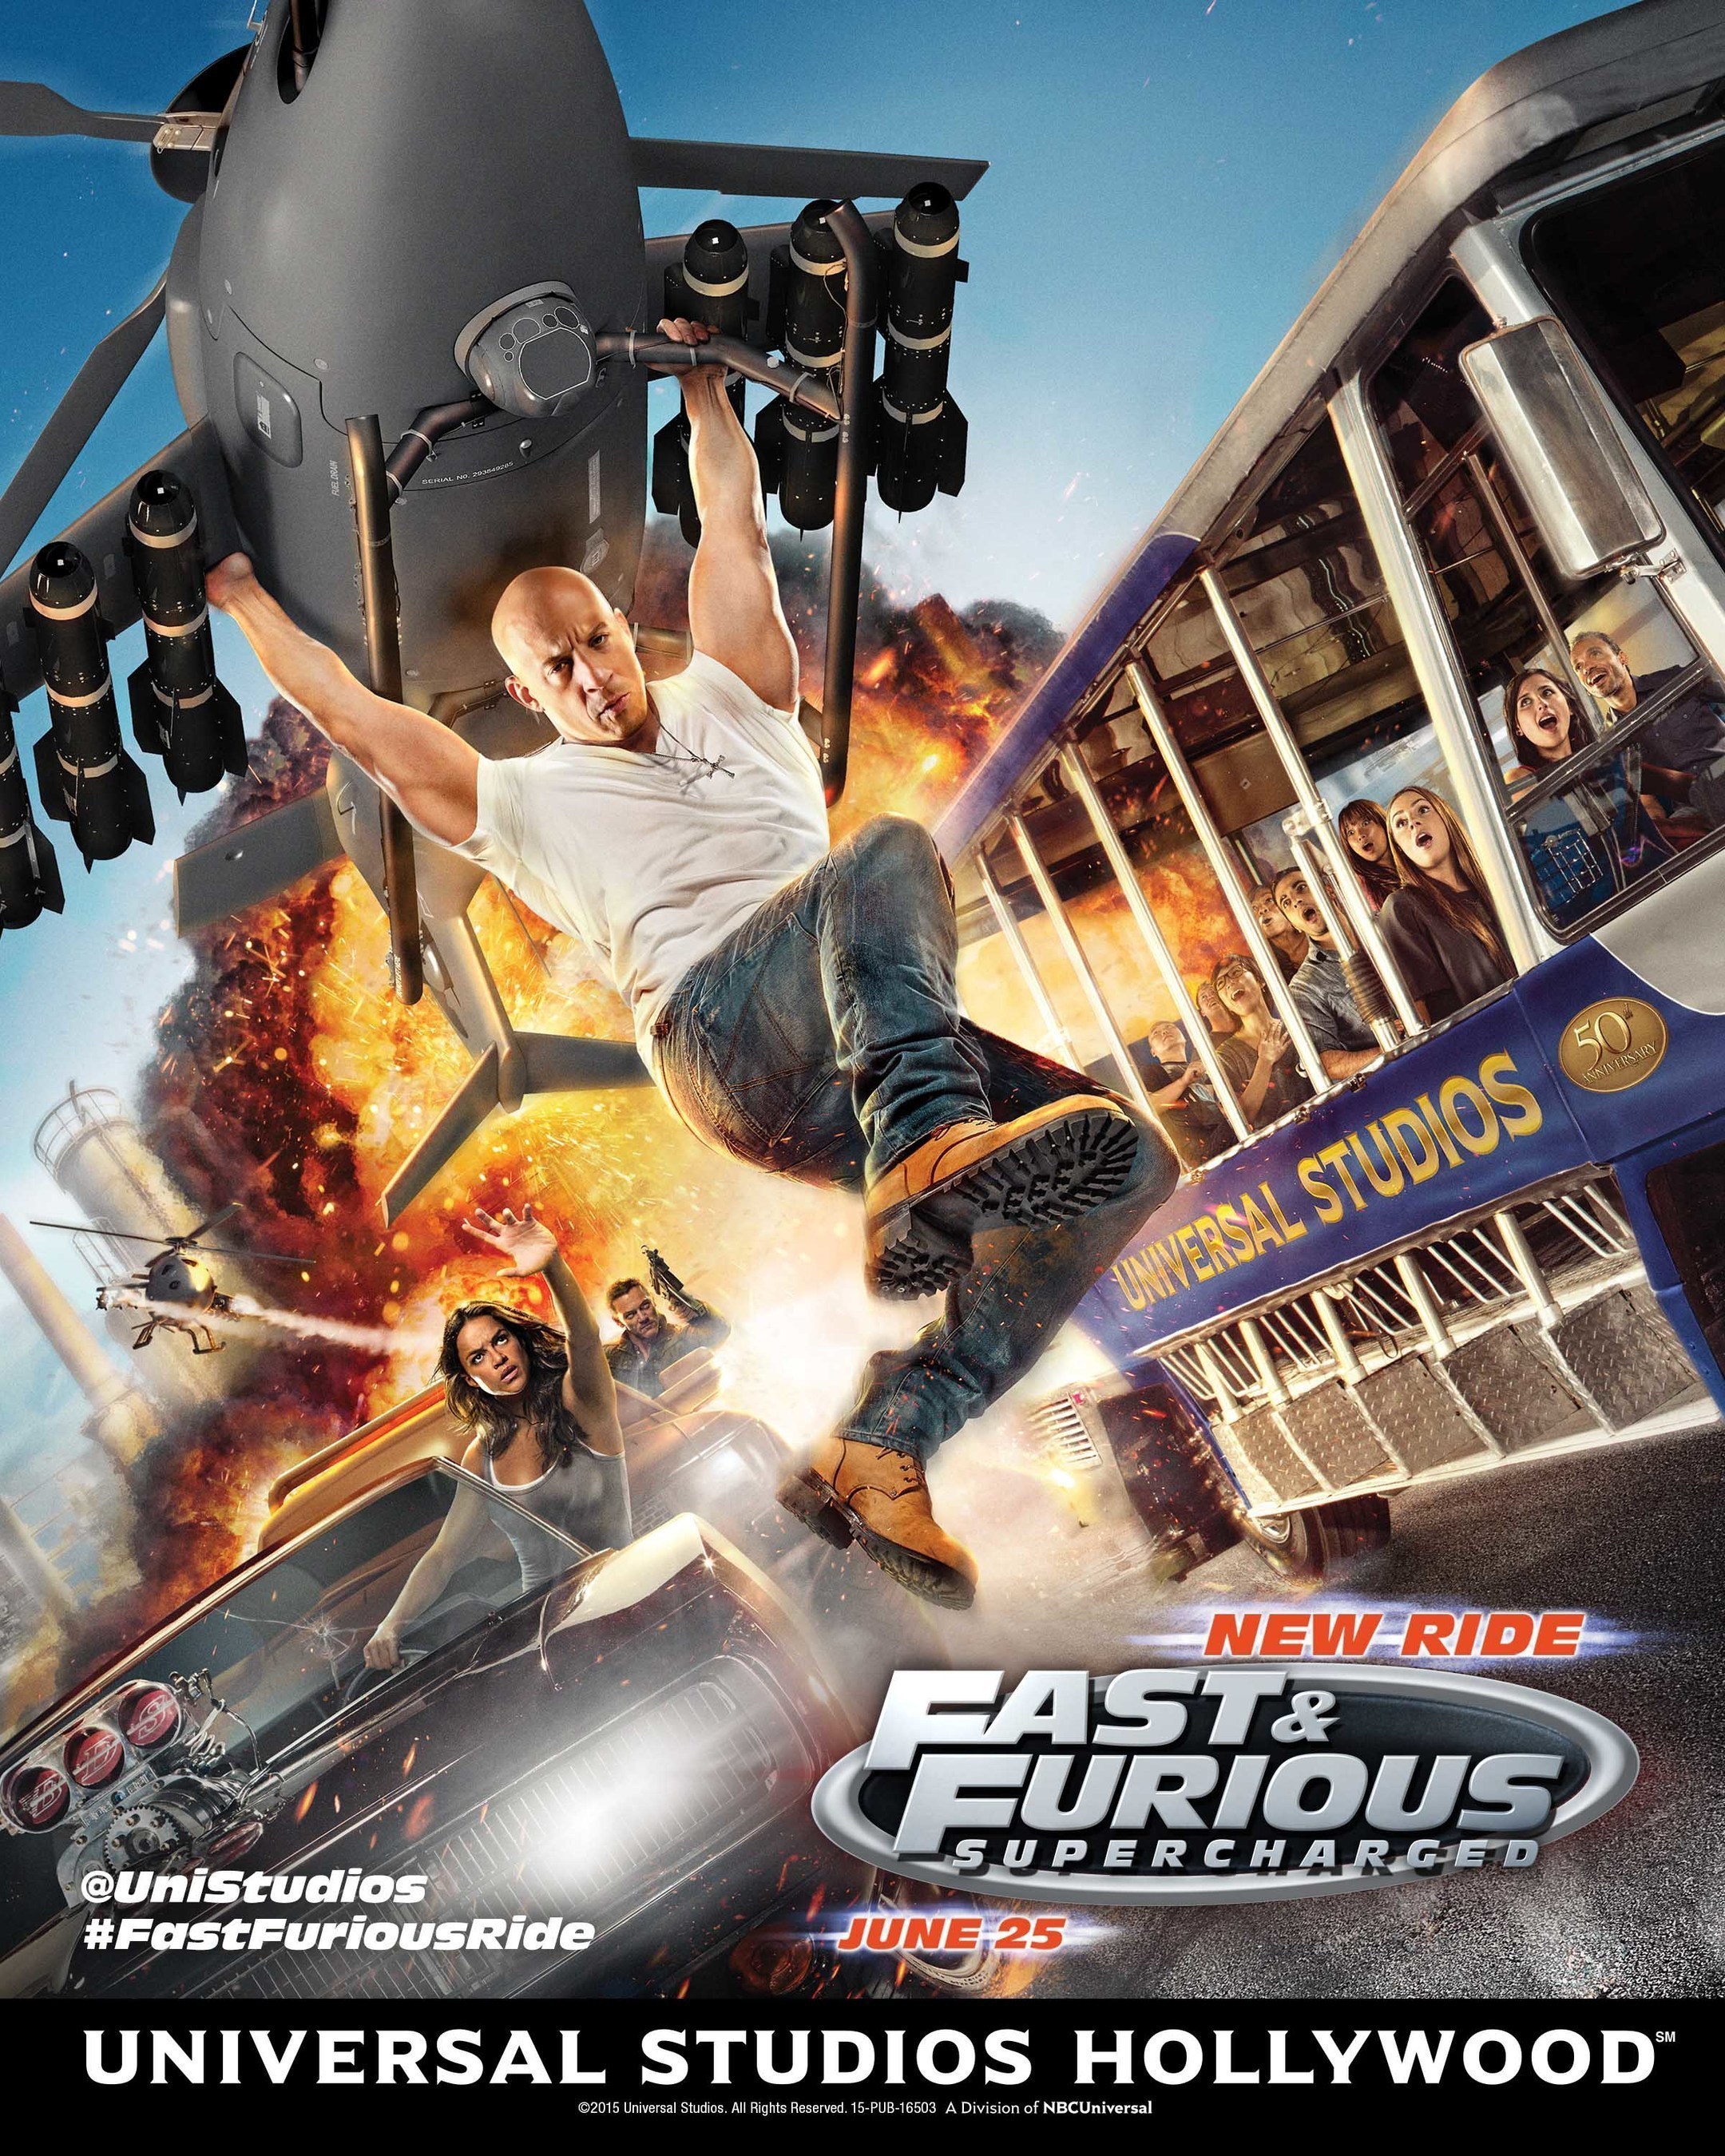 Universal Studios Hollywood shifts into high gear for the June 25 opening of "Fast & Furious-Supercharged" with the debut of an original poster image featuring the characters racing alongside a Studio Tour tram.